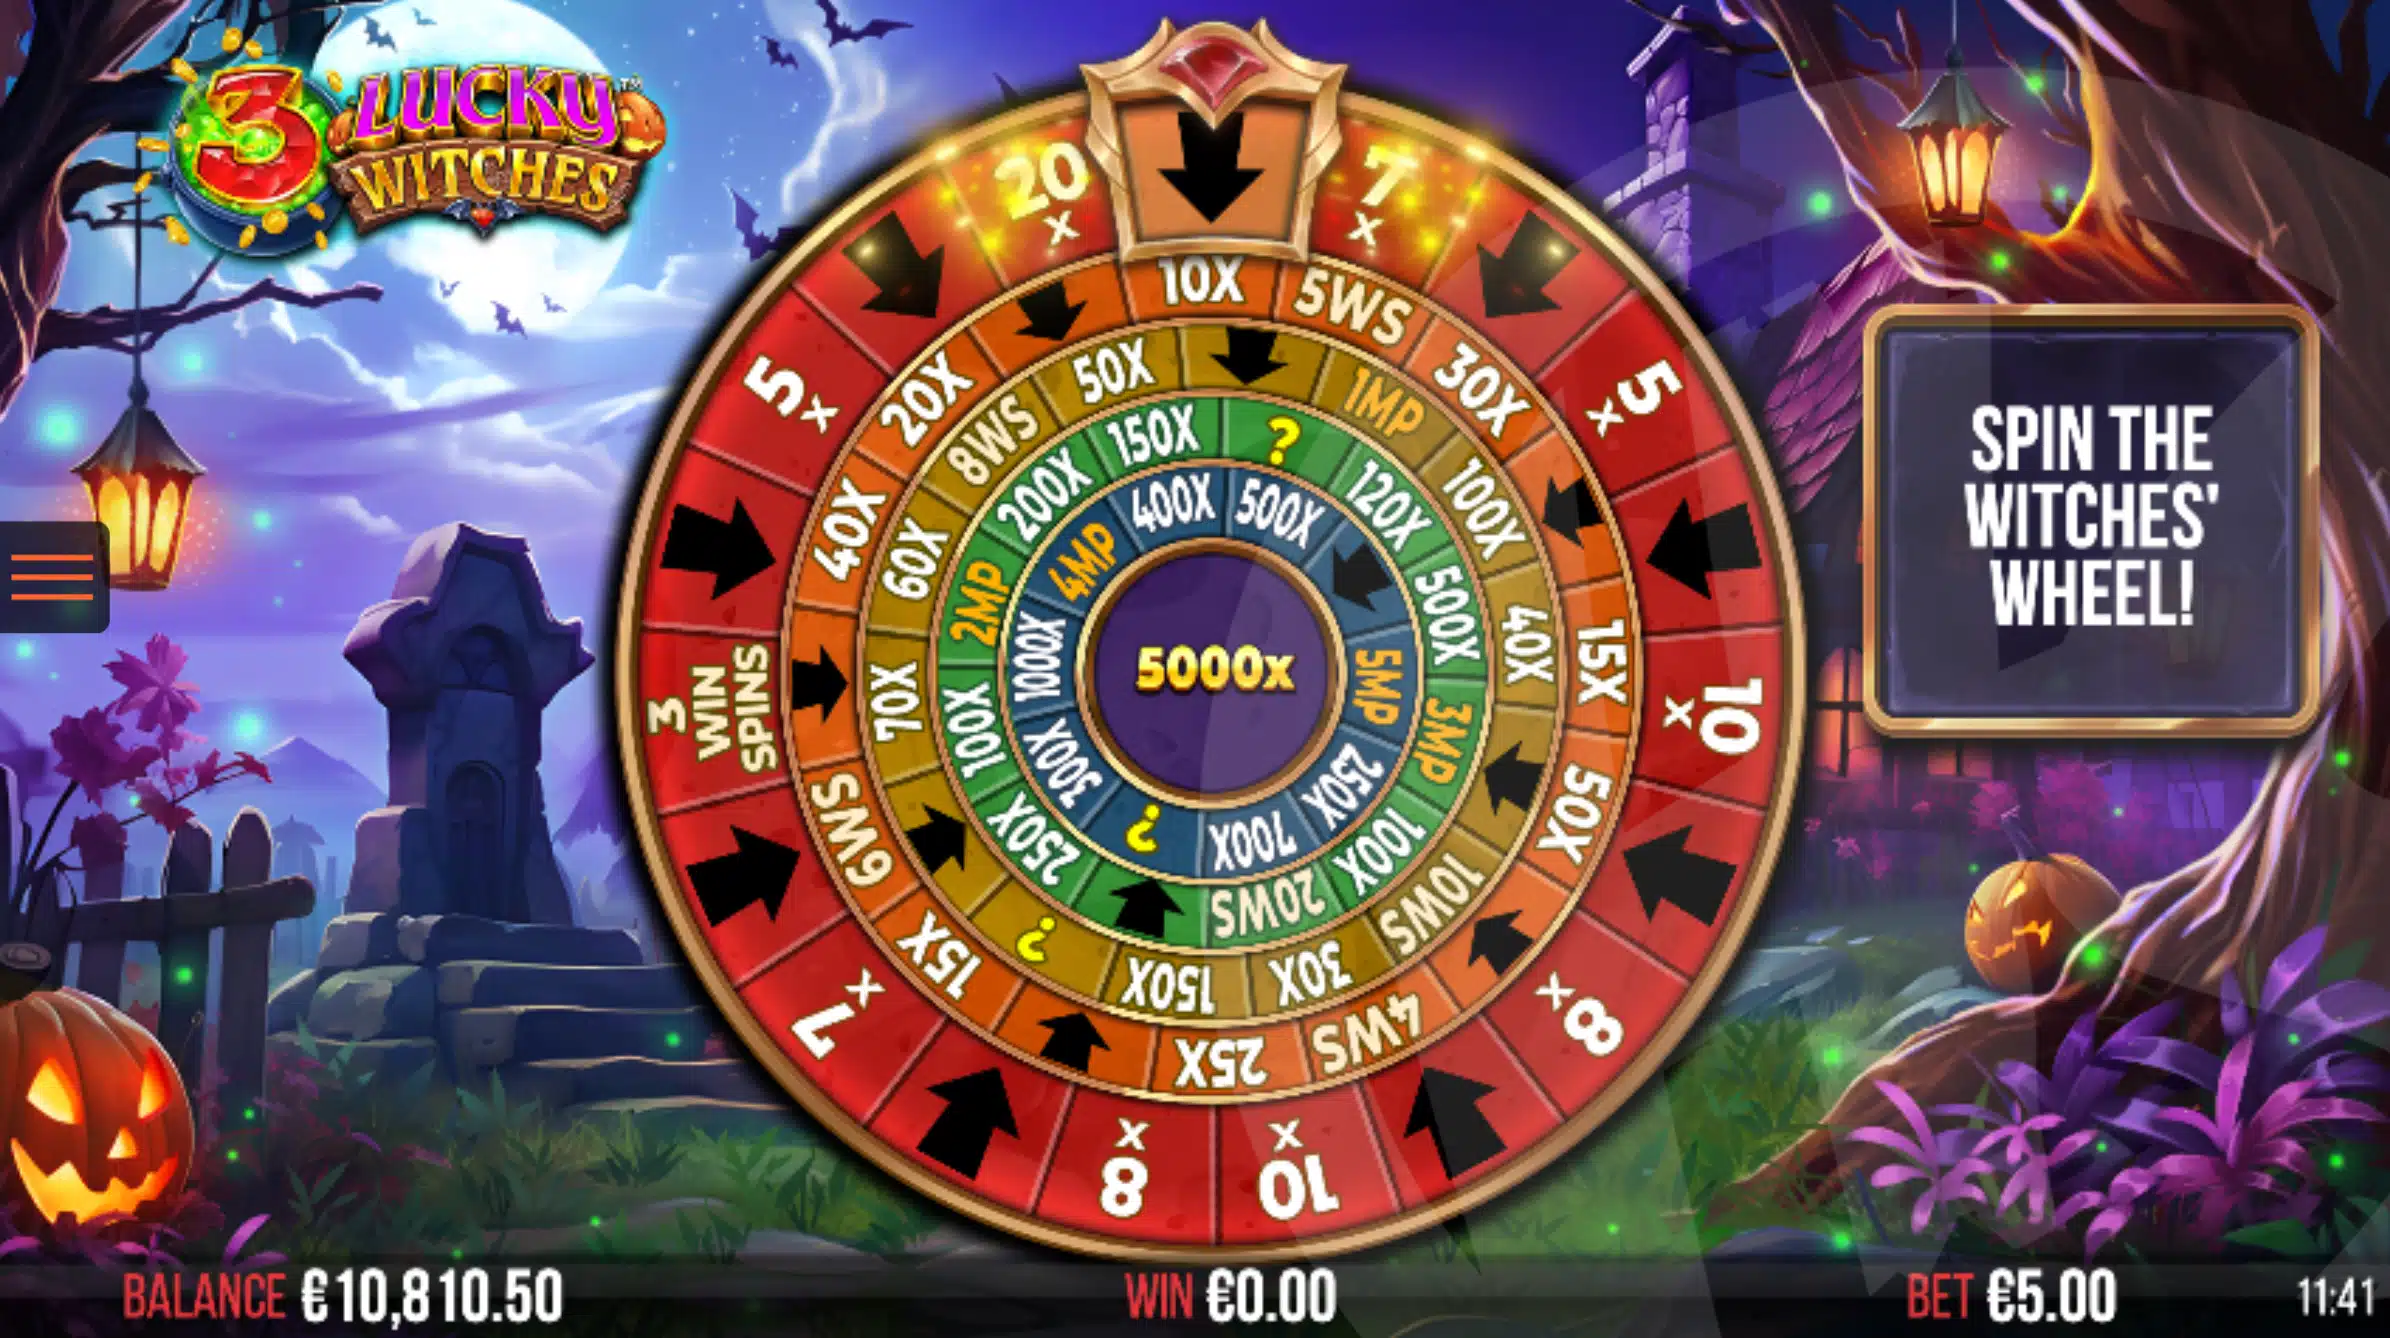 3 Lucky Witches Witches' Wheel